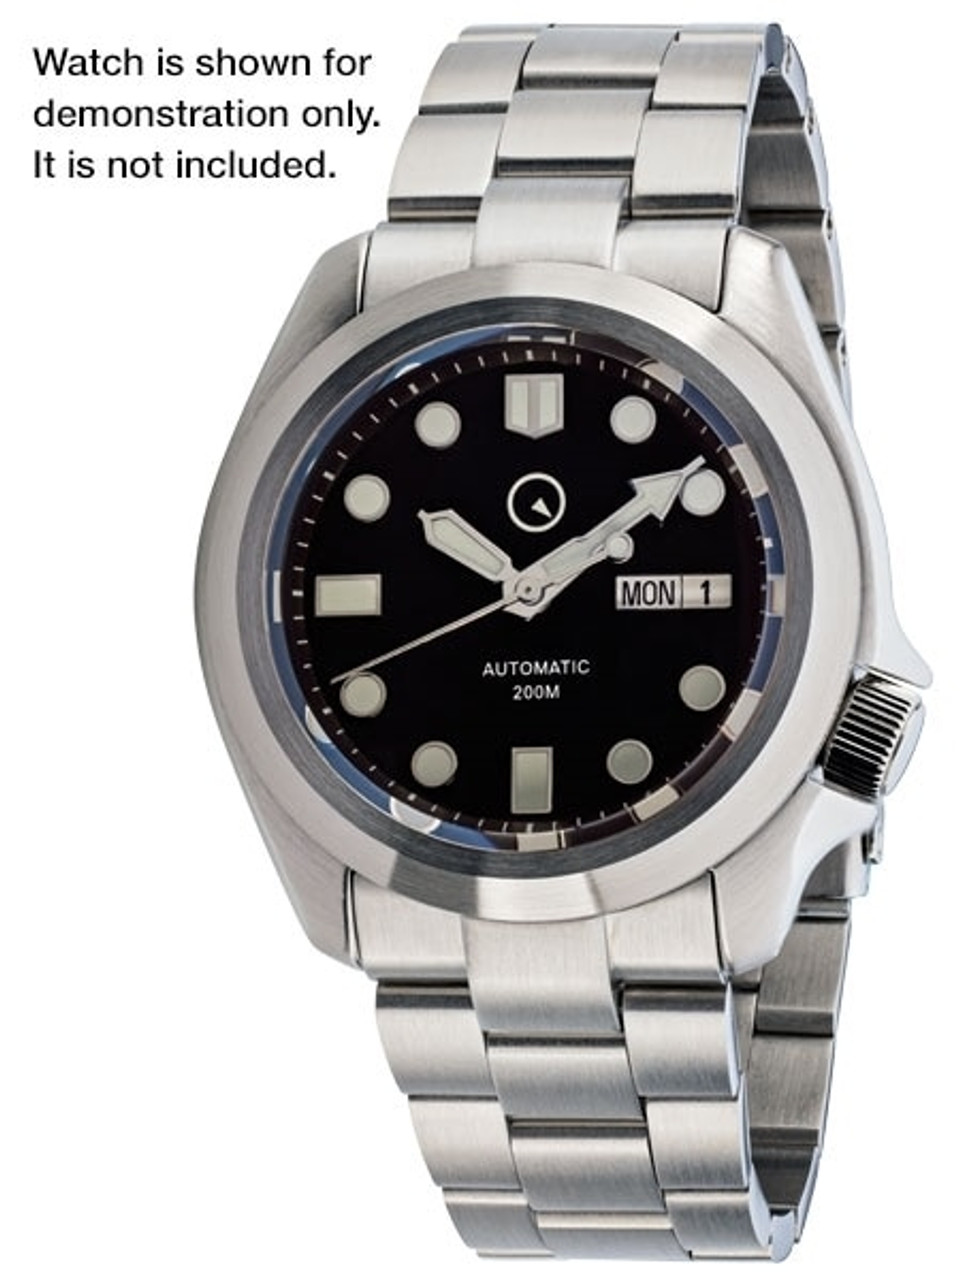 Brushed Finish SS, Unmarked Bezel for Seiko SKX007, SKX009 and Islander  43mm dive watches #B13-M